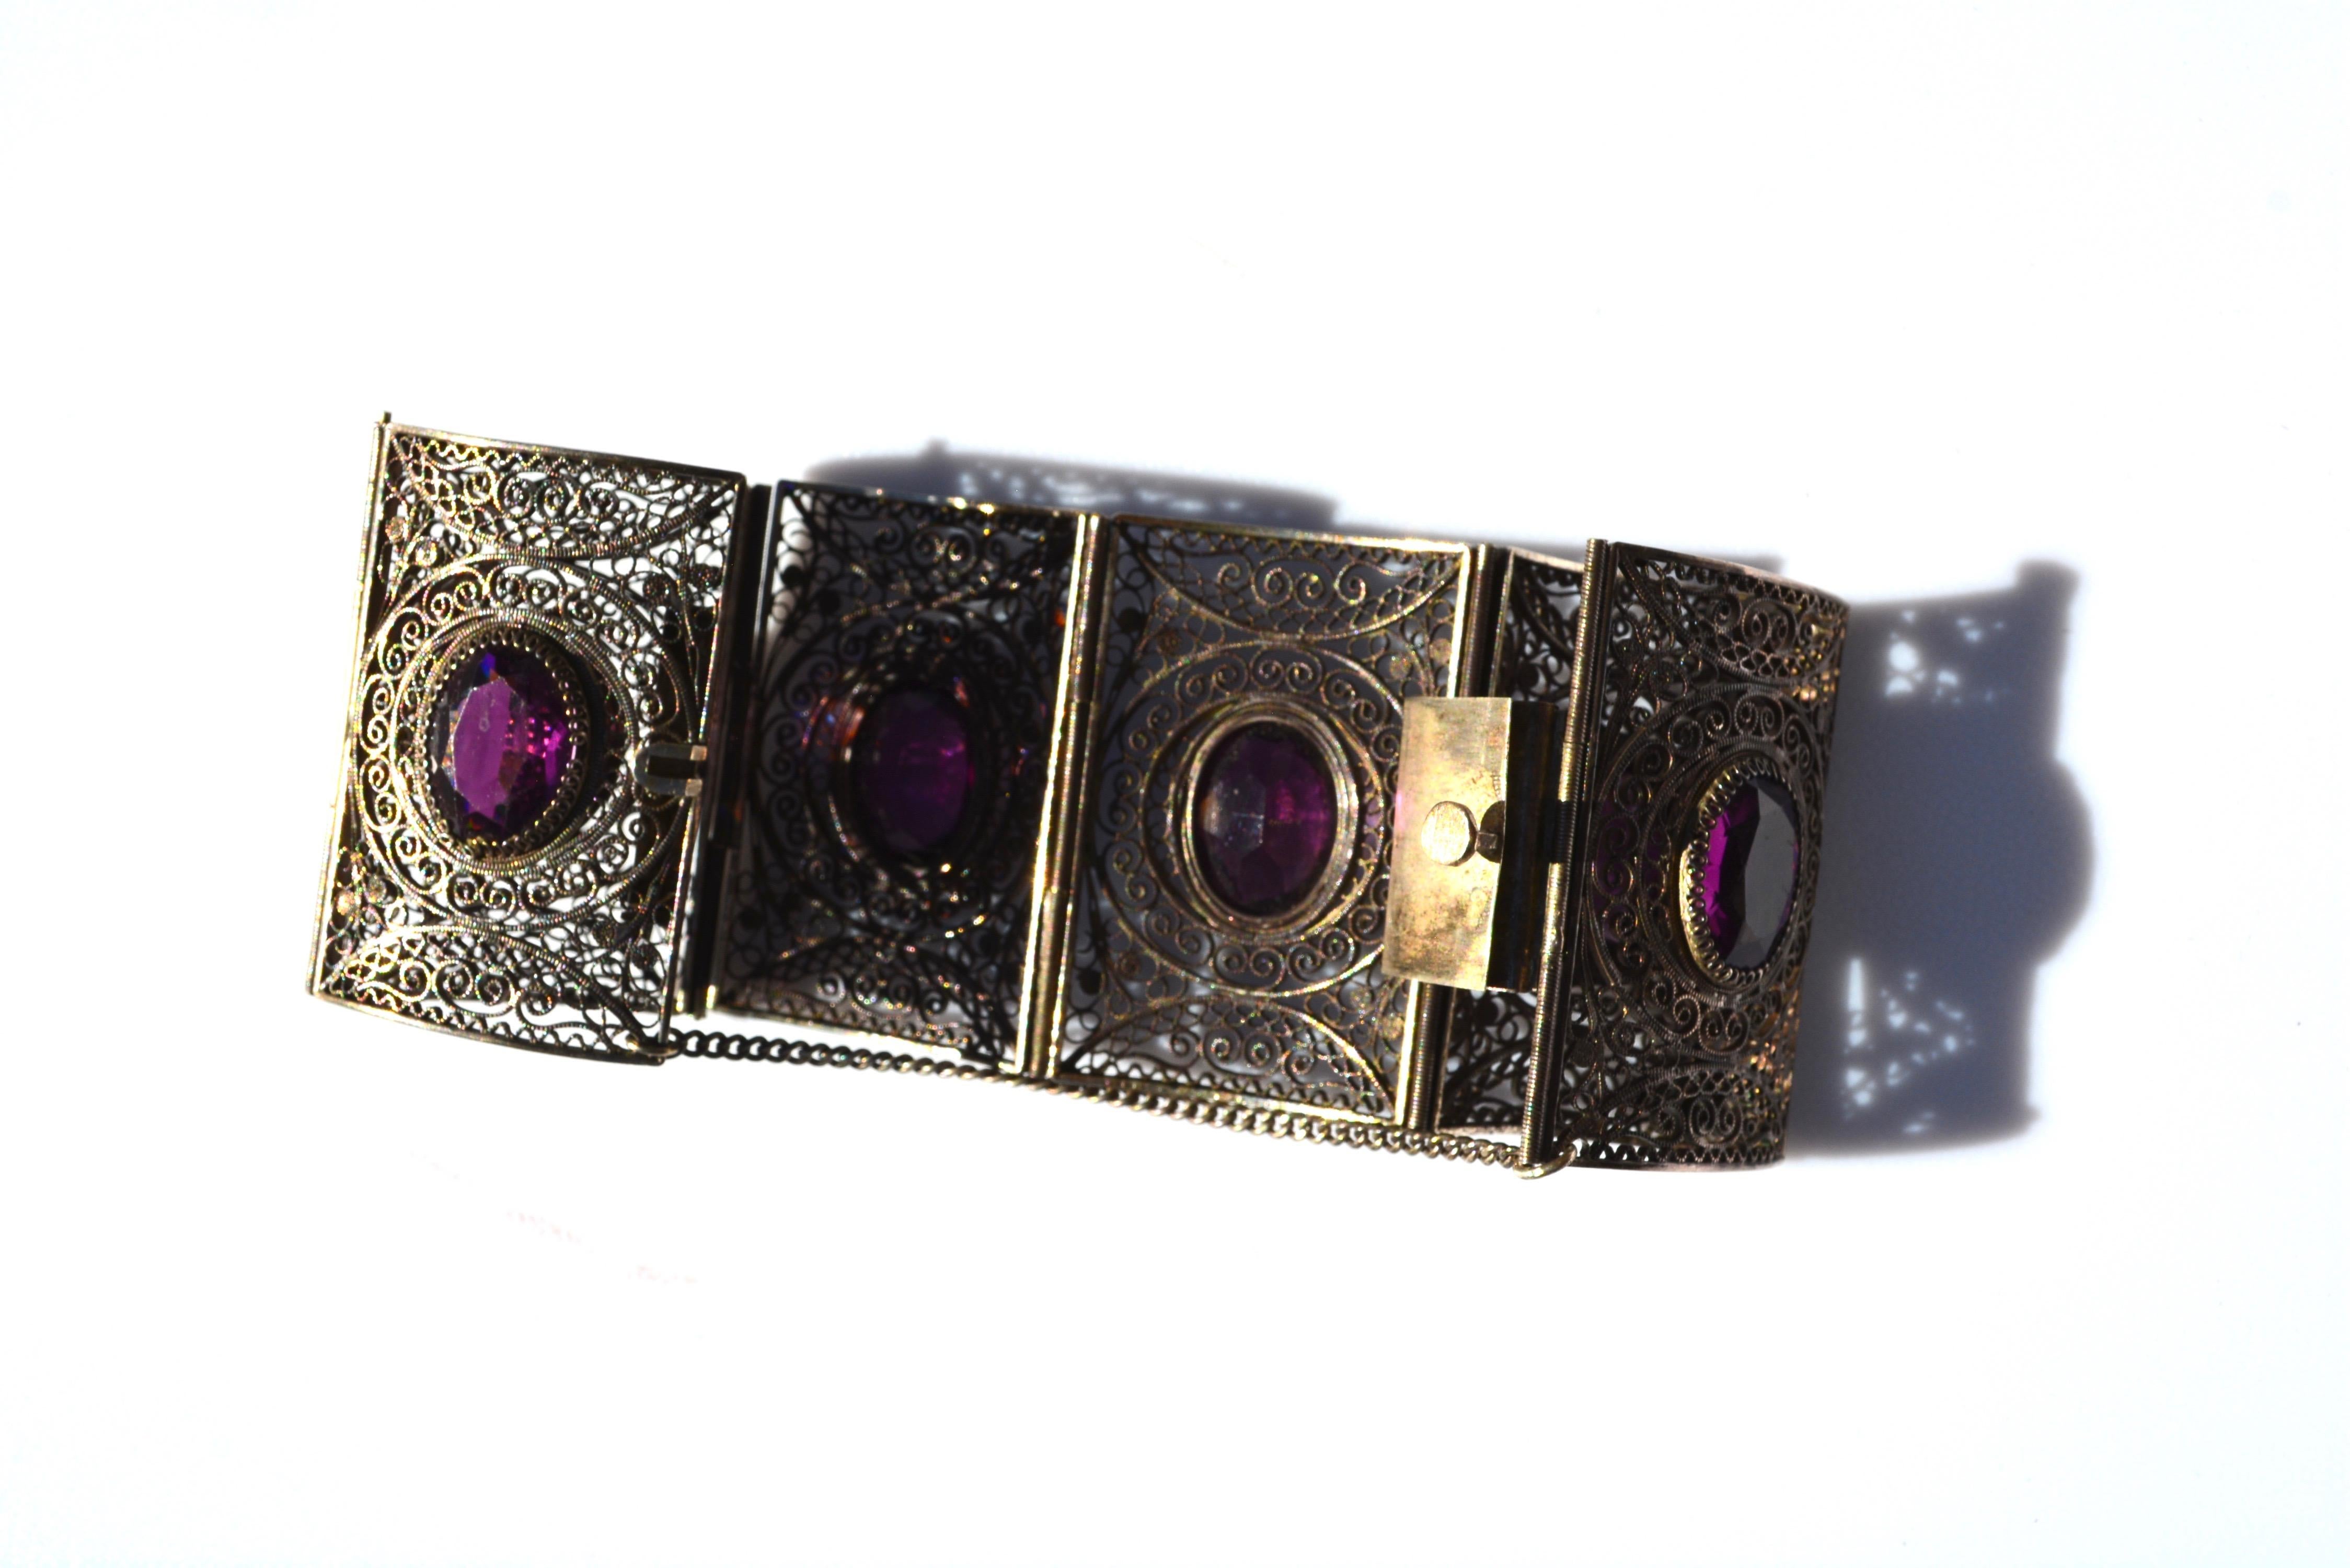 800 silver Edwardian glass and filigree wide cuff. Gorgeous craftsmanship. Condition is very good. 2